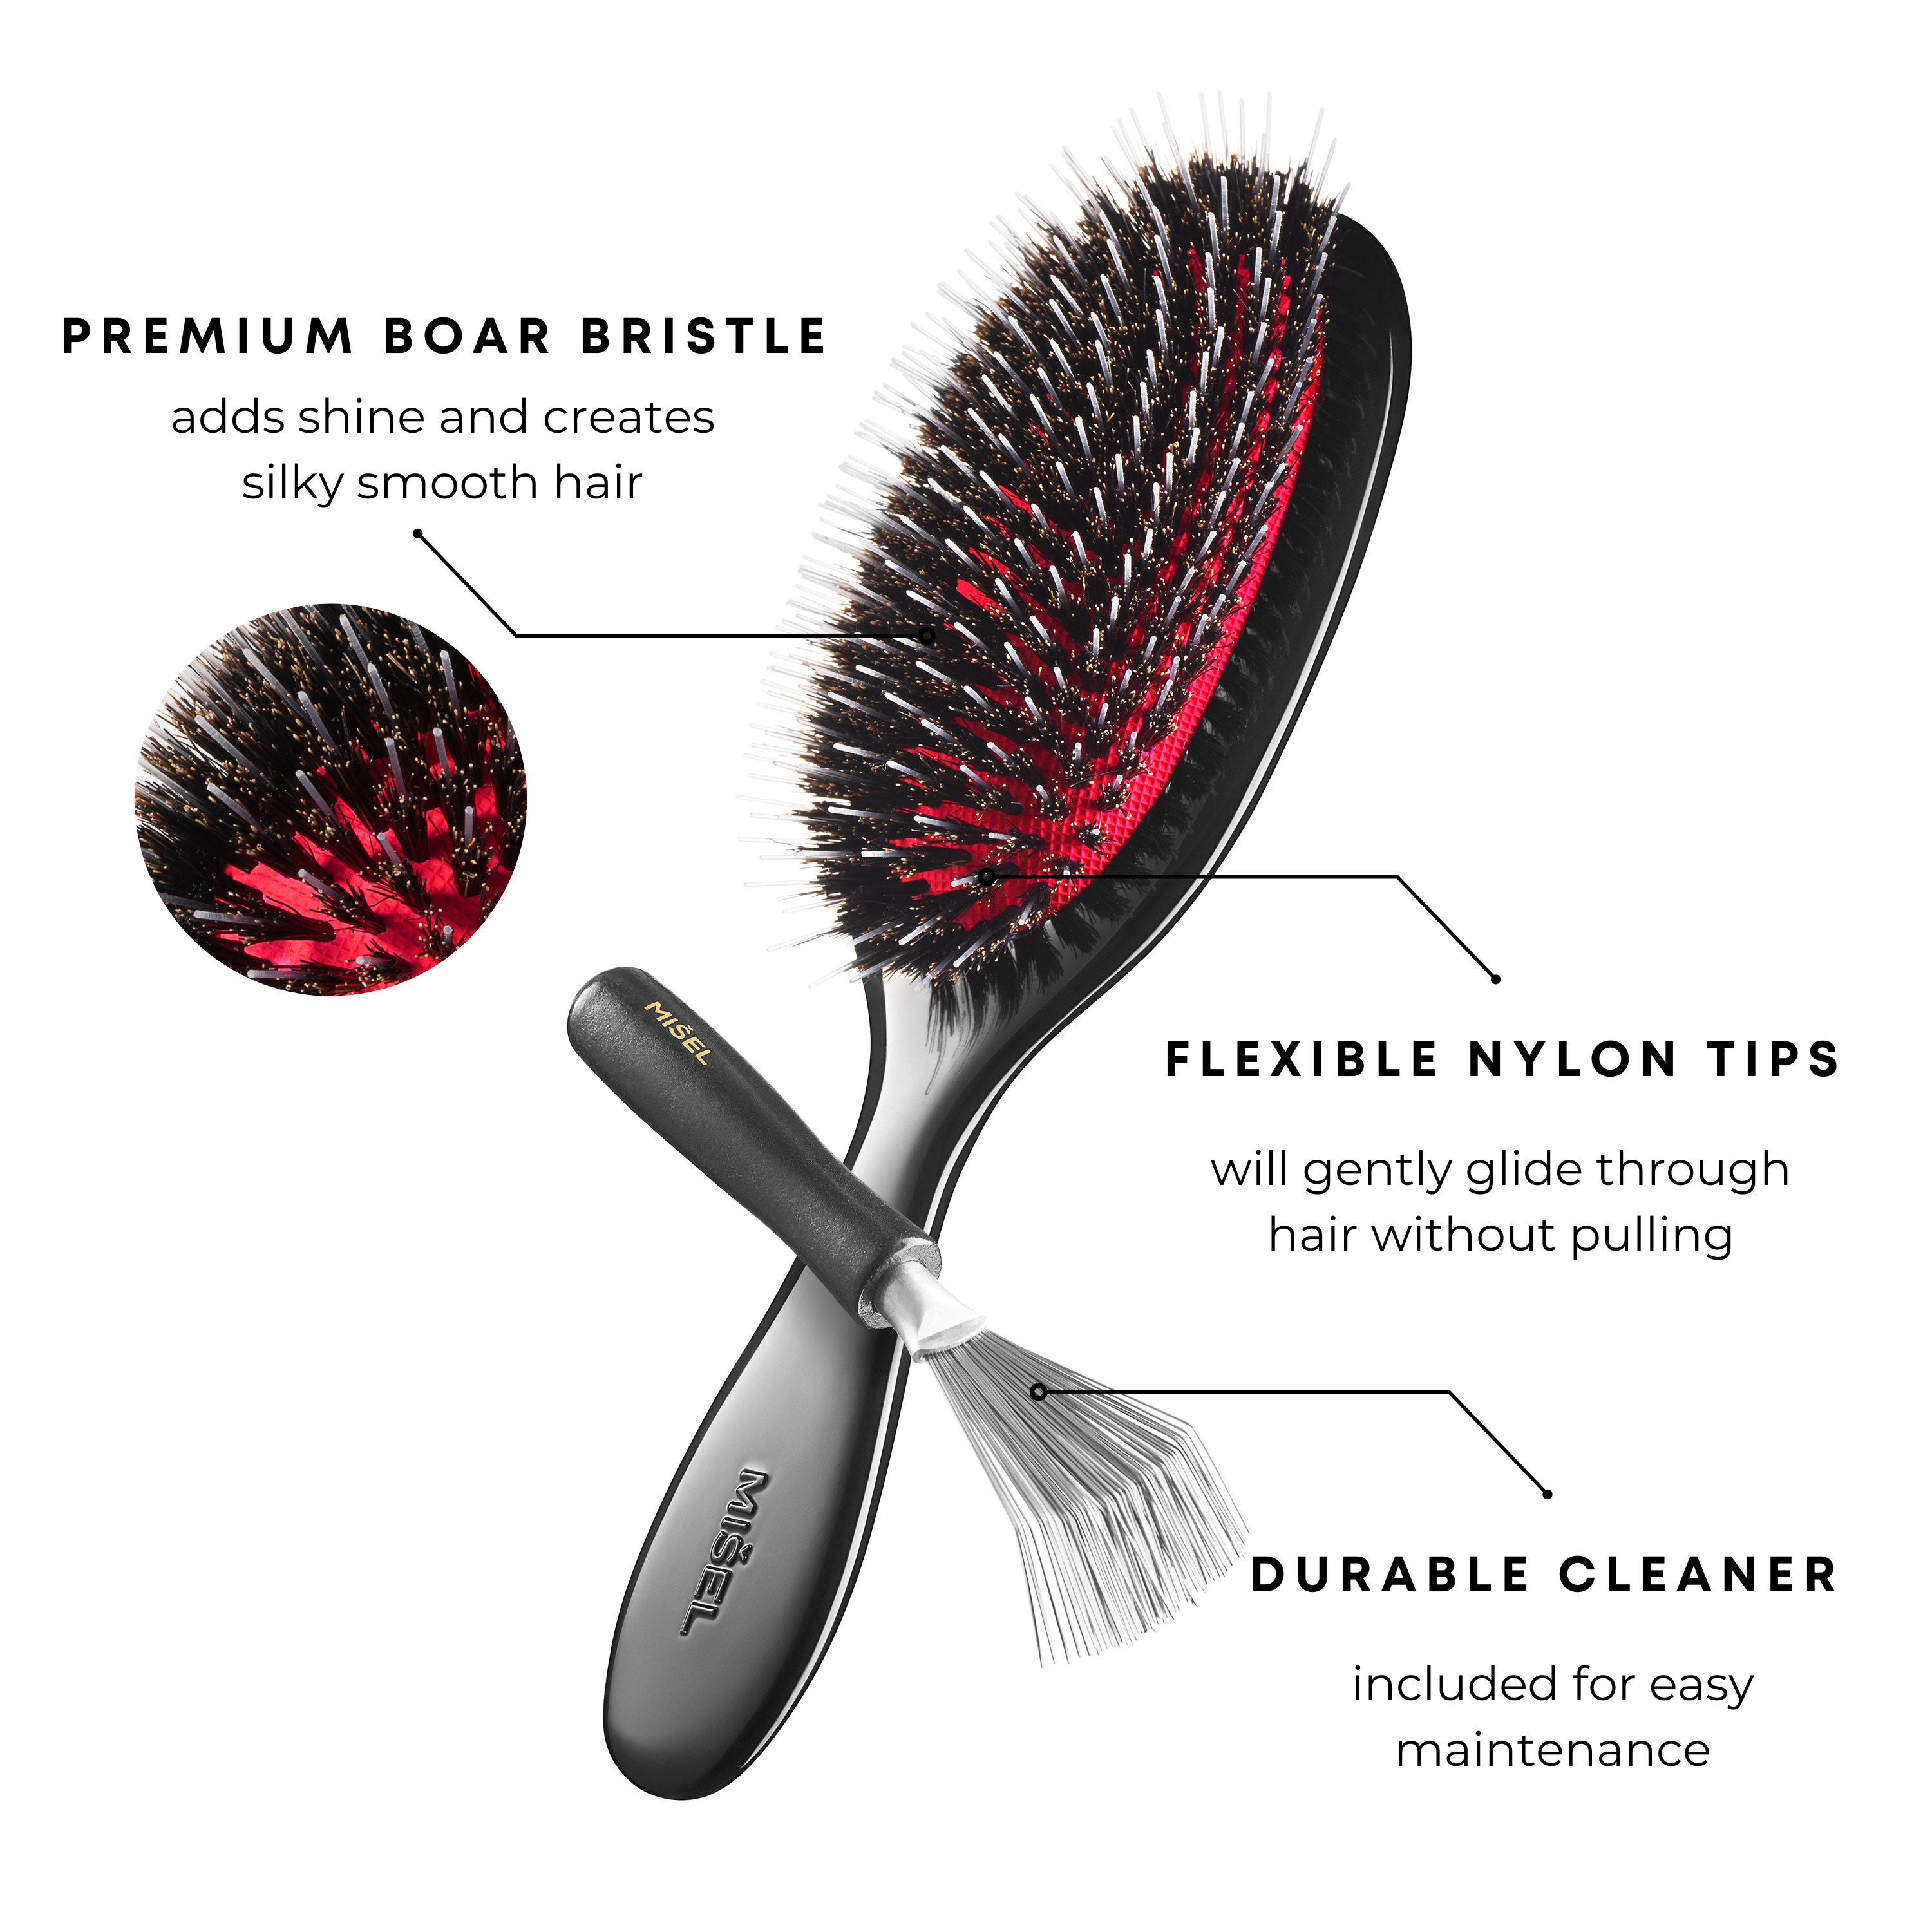 Medium hairbrush and Cleaner in a gift box